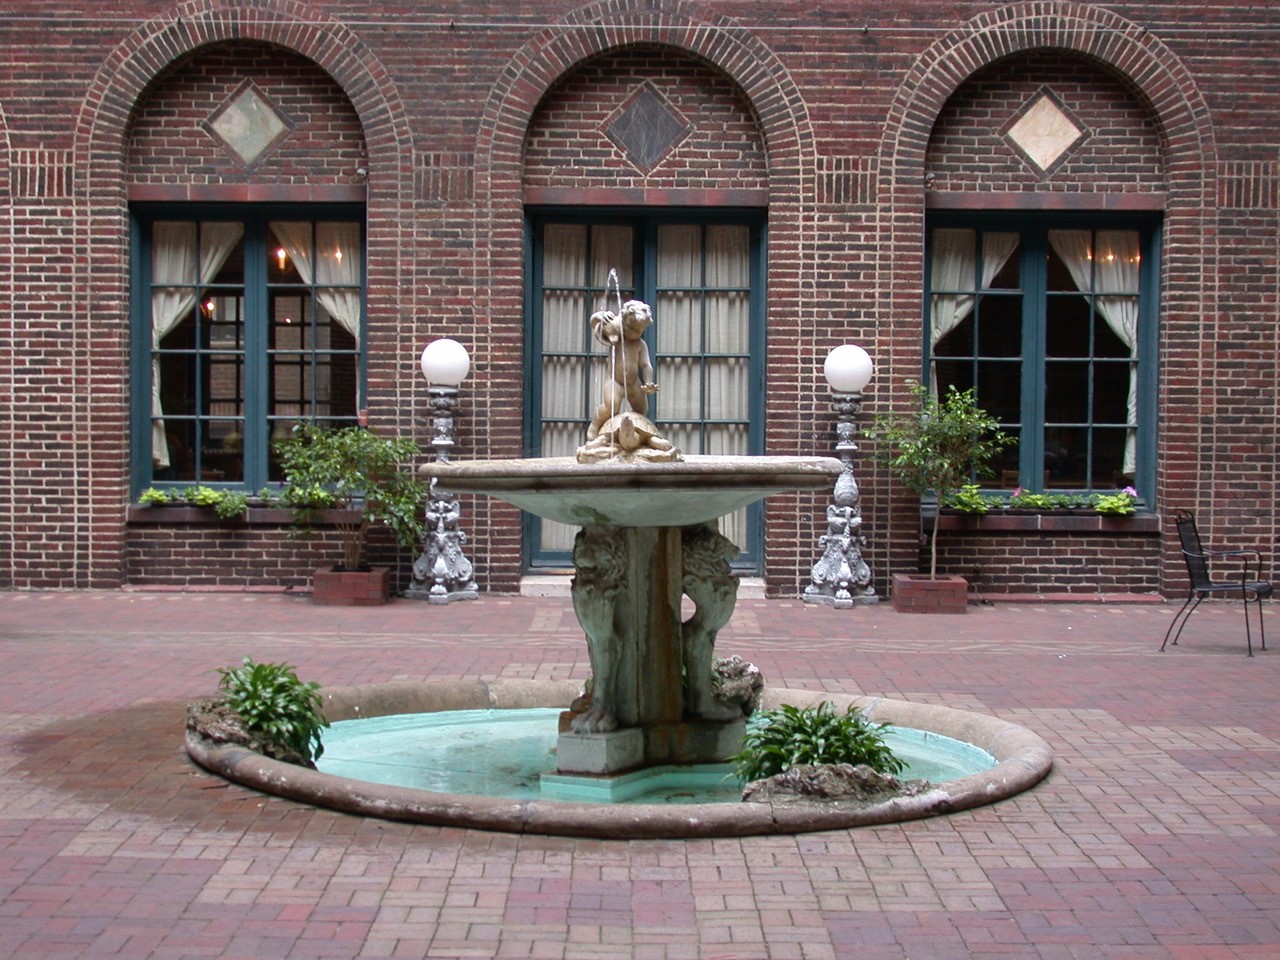 Decorative fountain in the center of a brick patio with three arched windows in the background